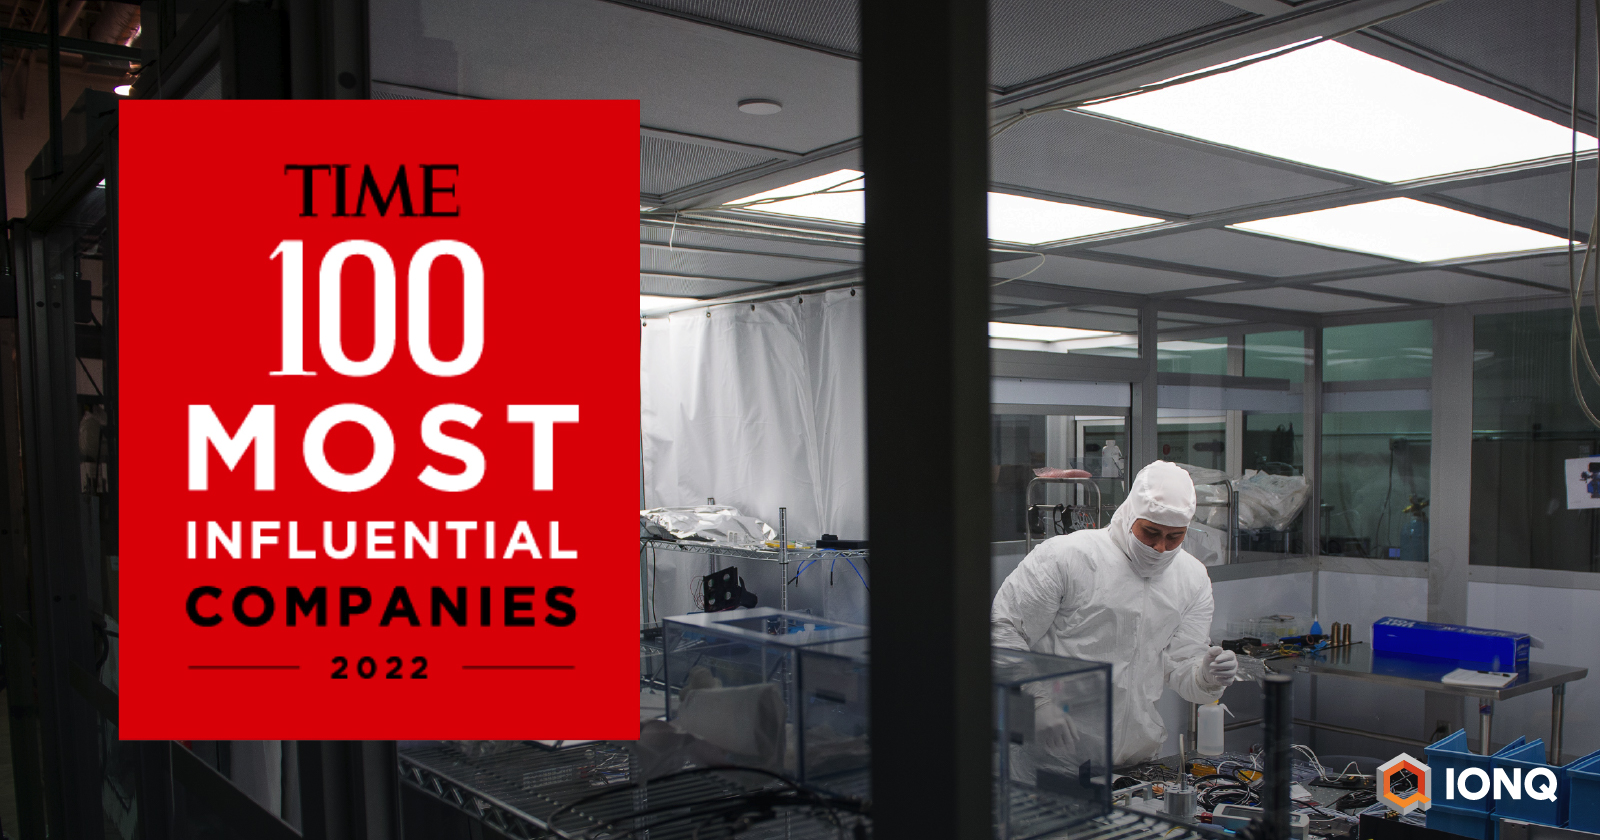 TIME100 most influential companies list badge overlaid over image of IonQ staff in cleanroom